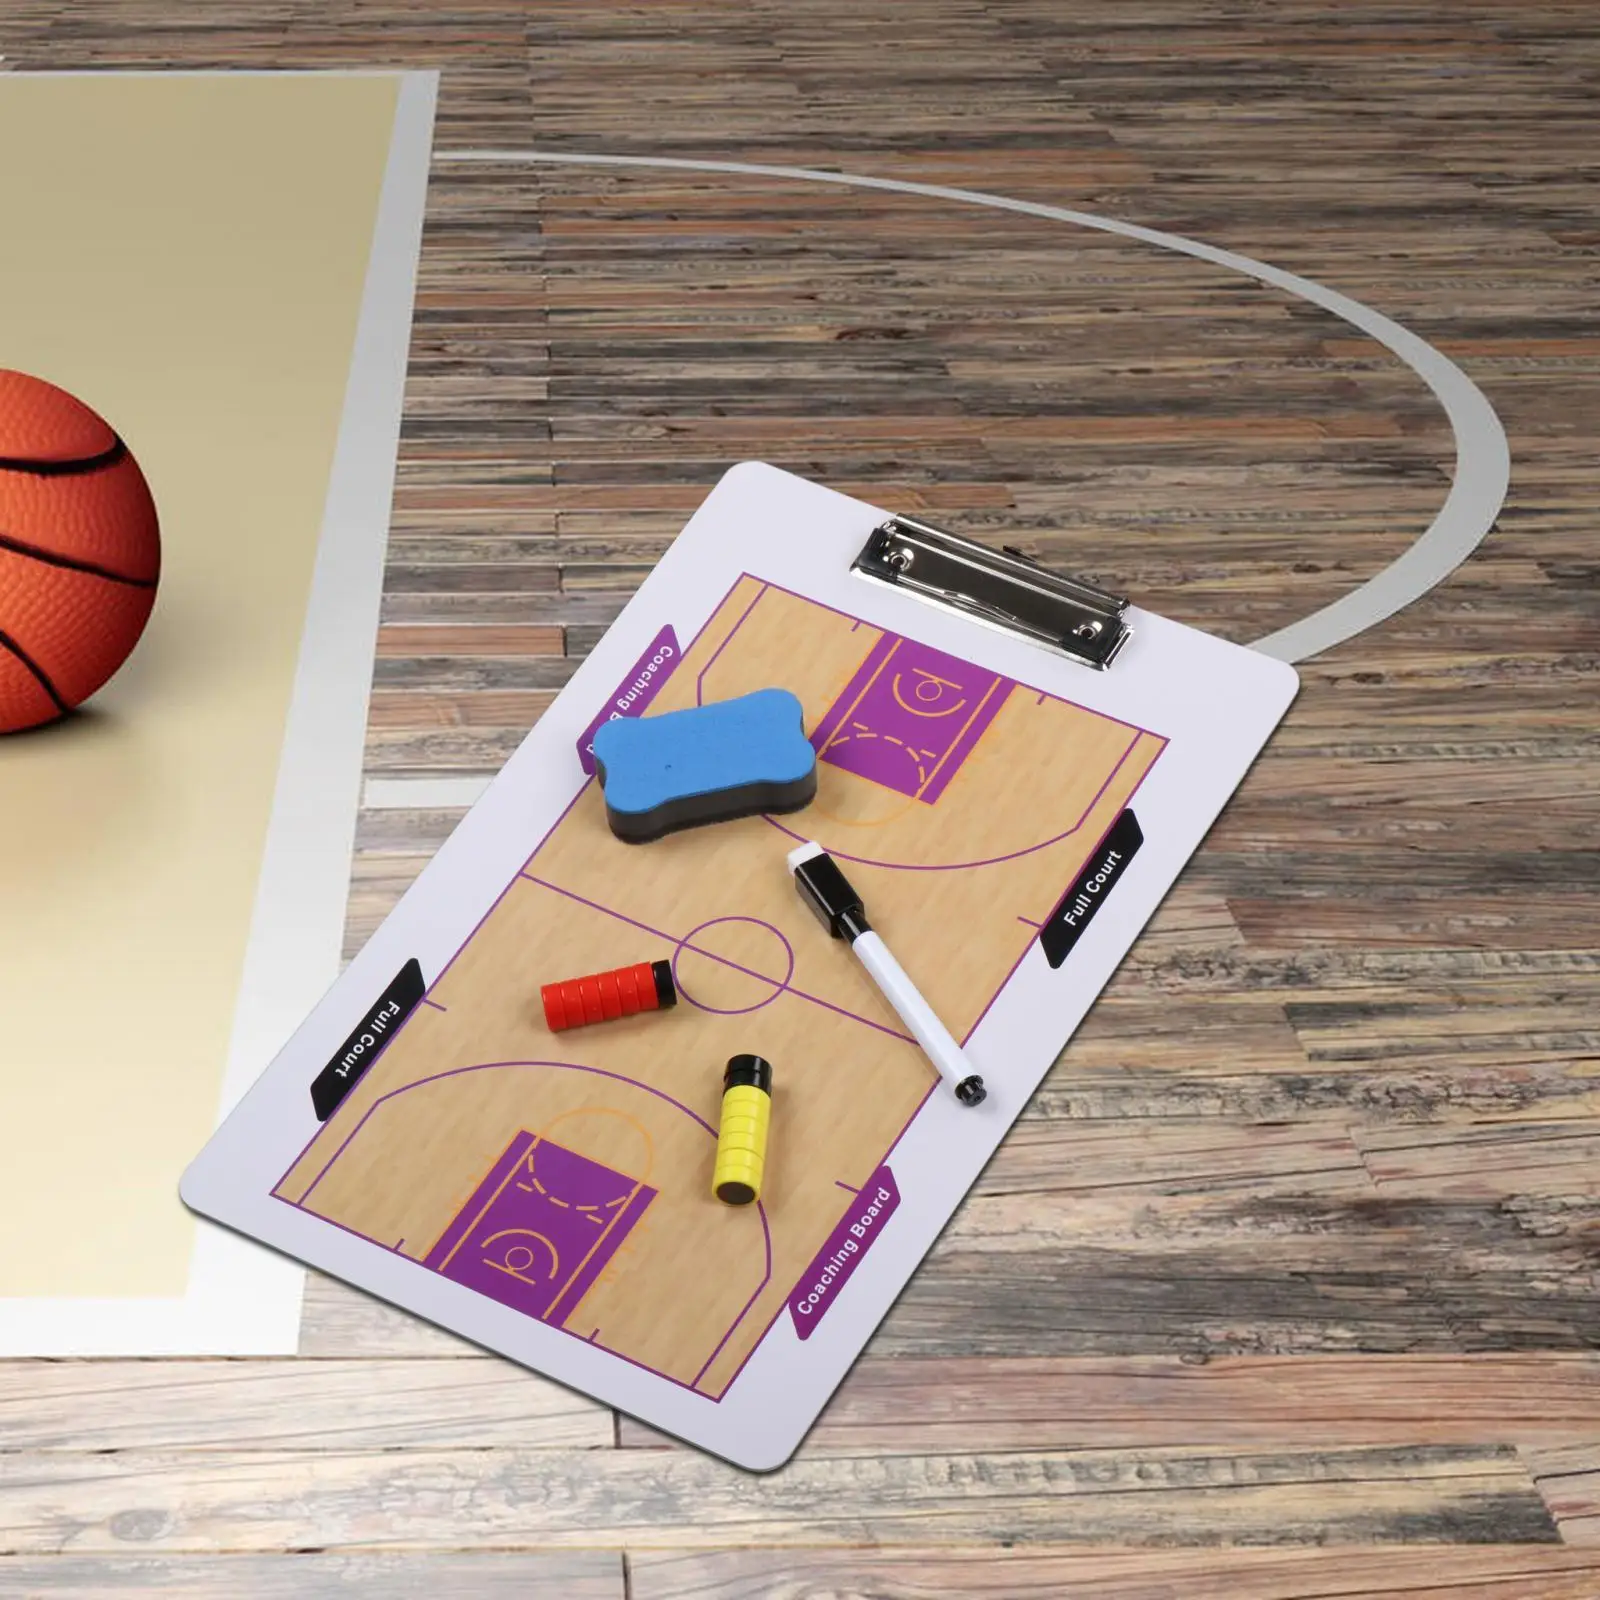 Basketball Coaching Boards Teaching Assistant Referee Tactic Coaching Boards